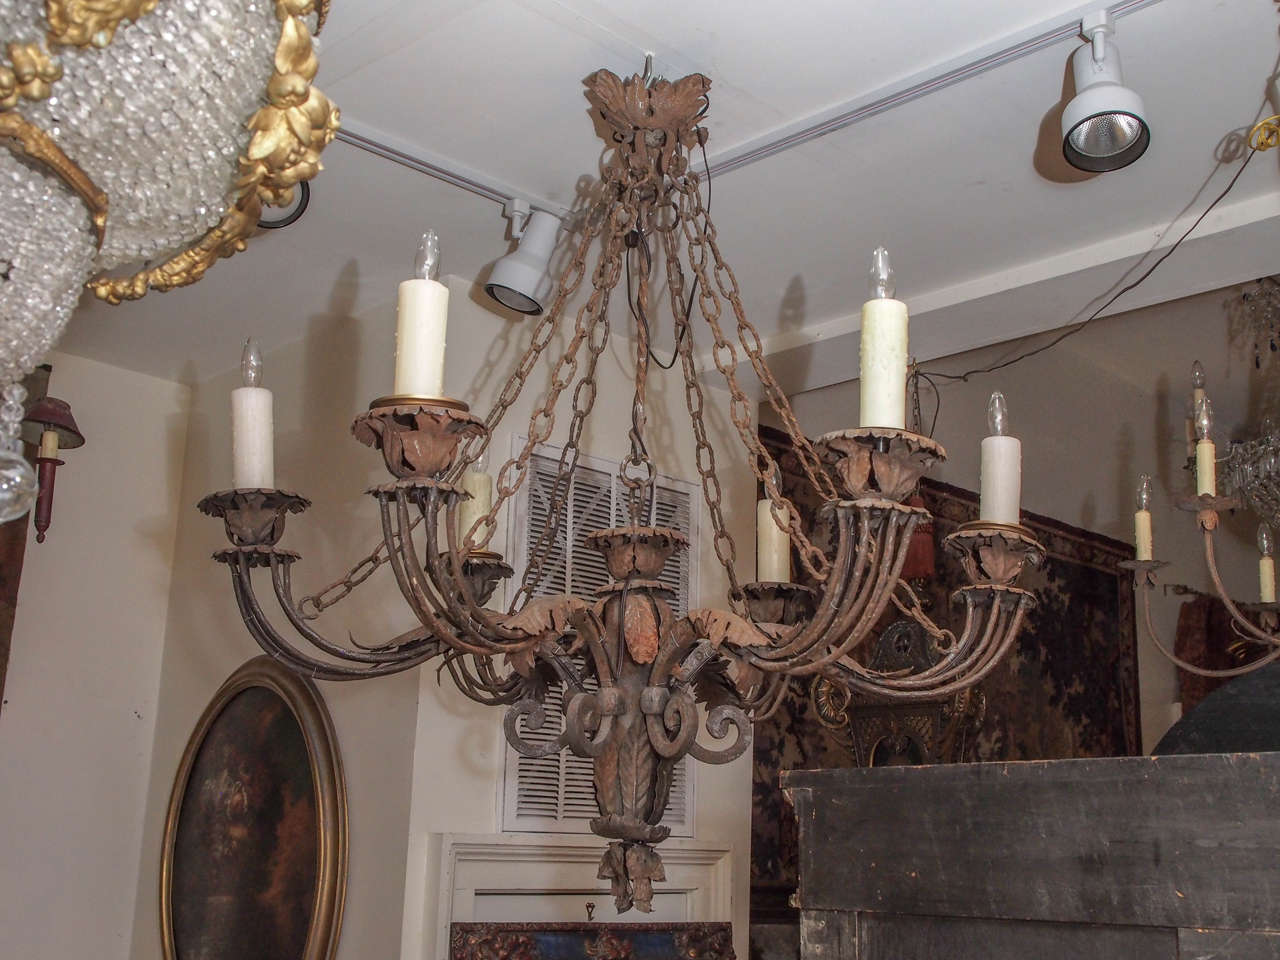 Handmade Italian iron six-arm chandelier with interesting chains and acanthus decoration.